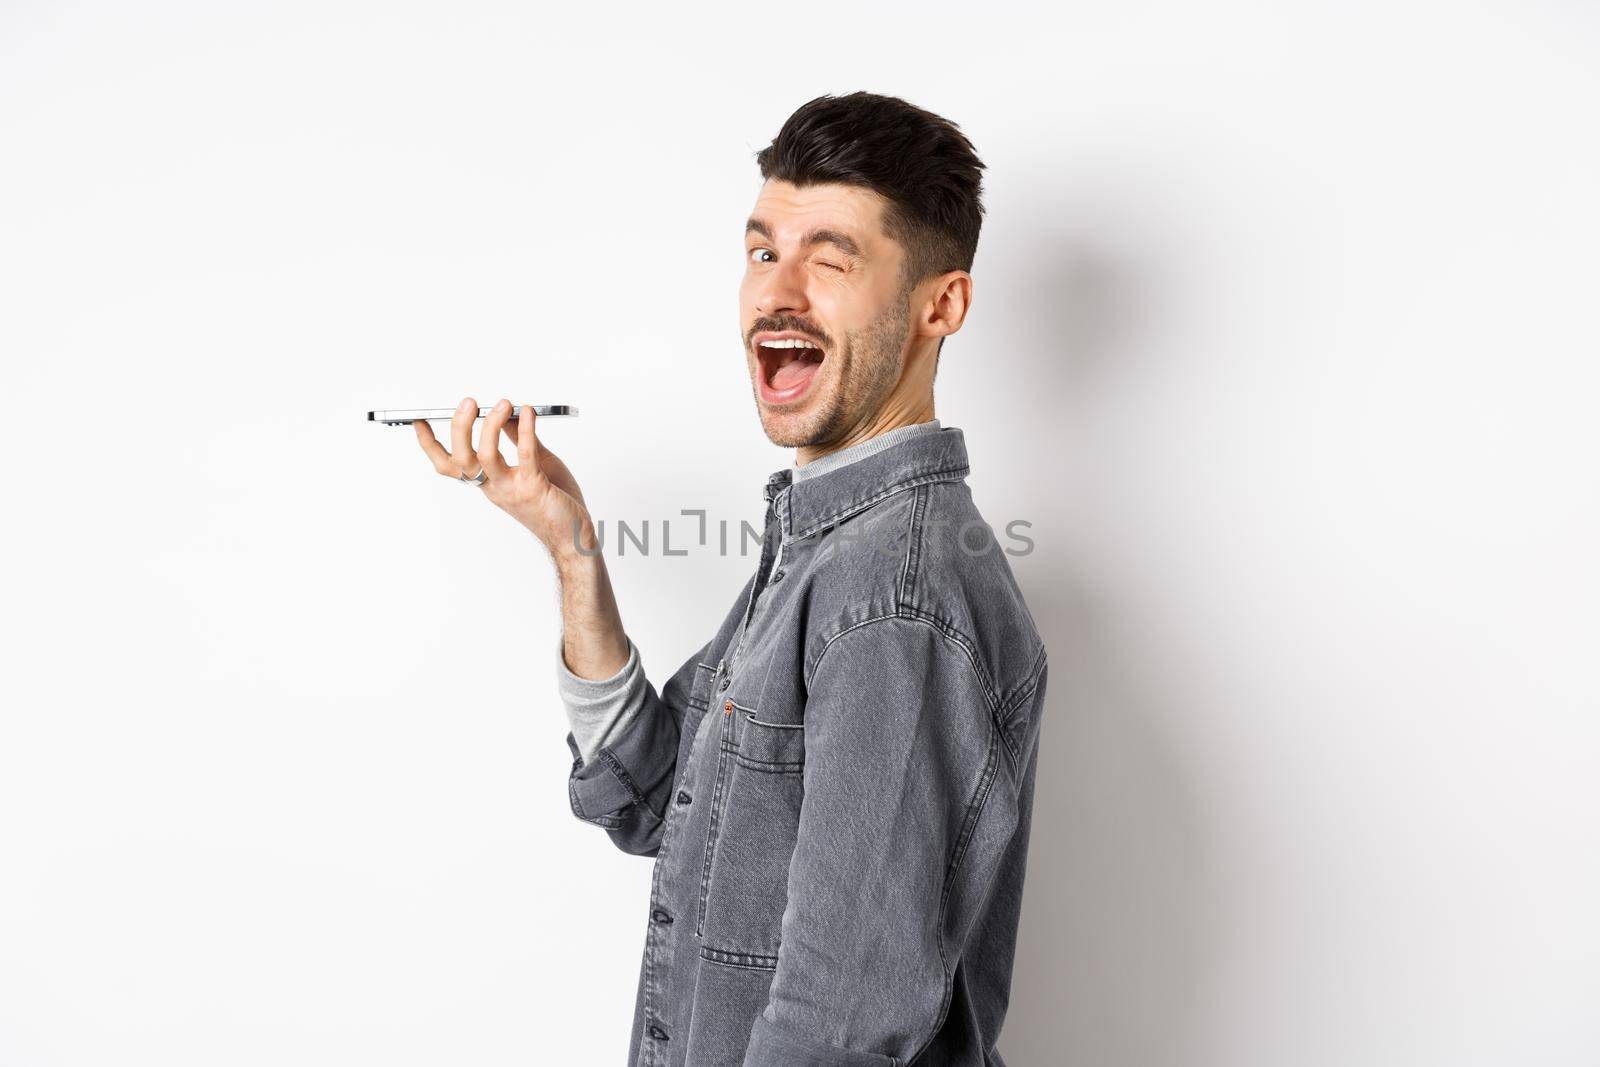 Happy guy winking at looking at camera while using voice translator app or talking on speakerphone, holding phone close to mouth, standing on white background.